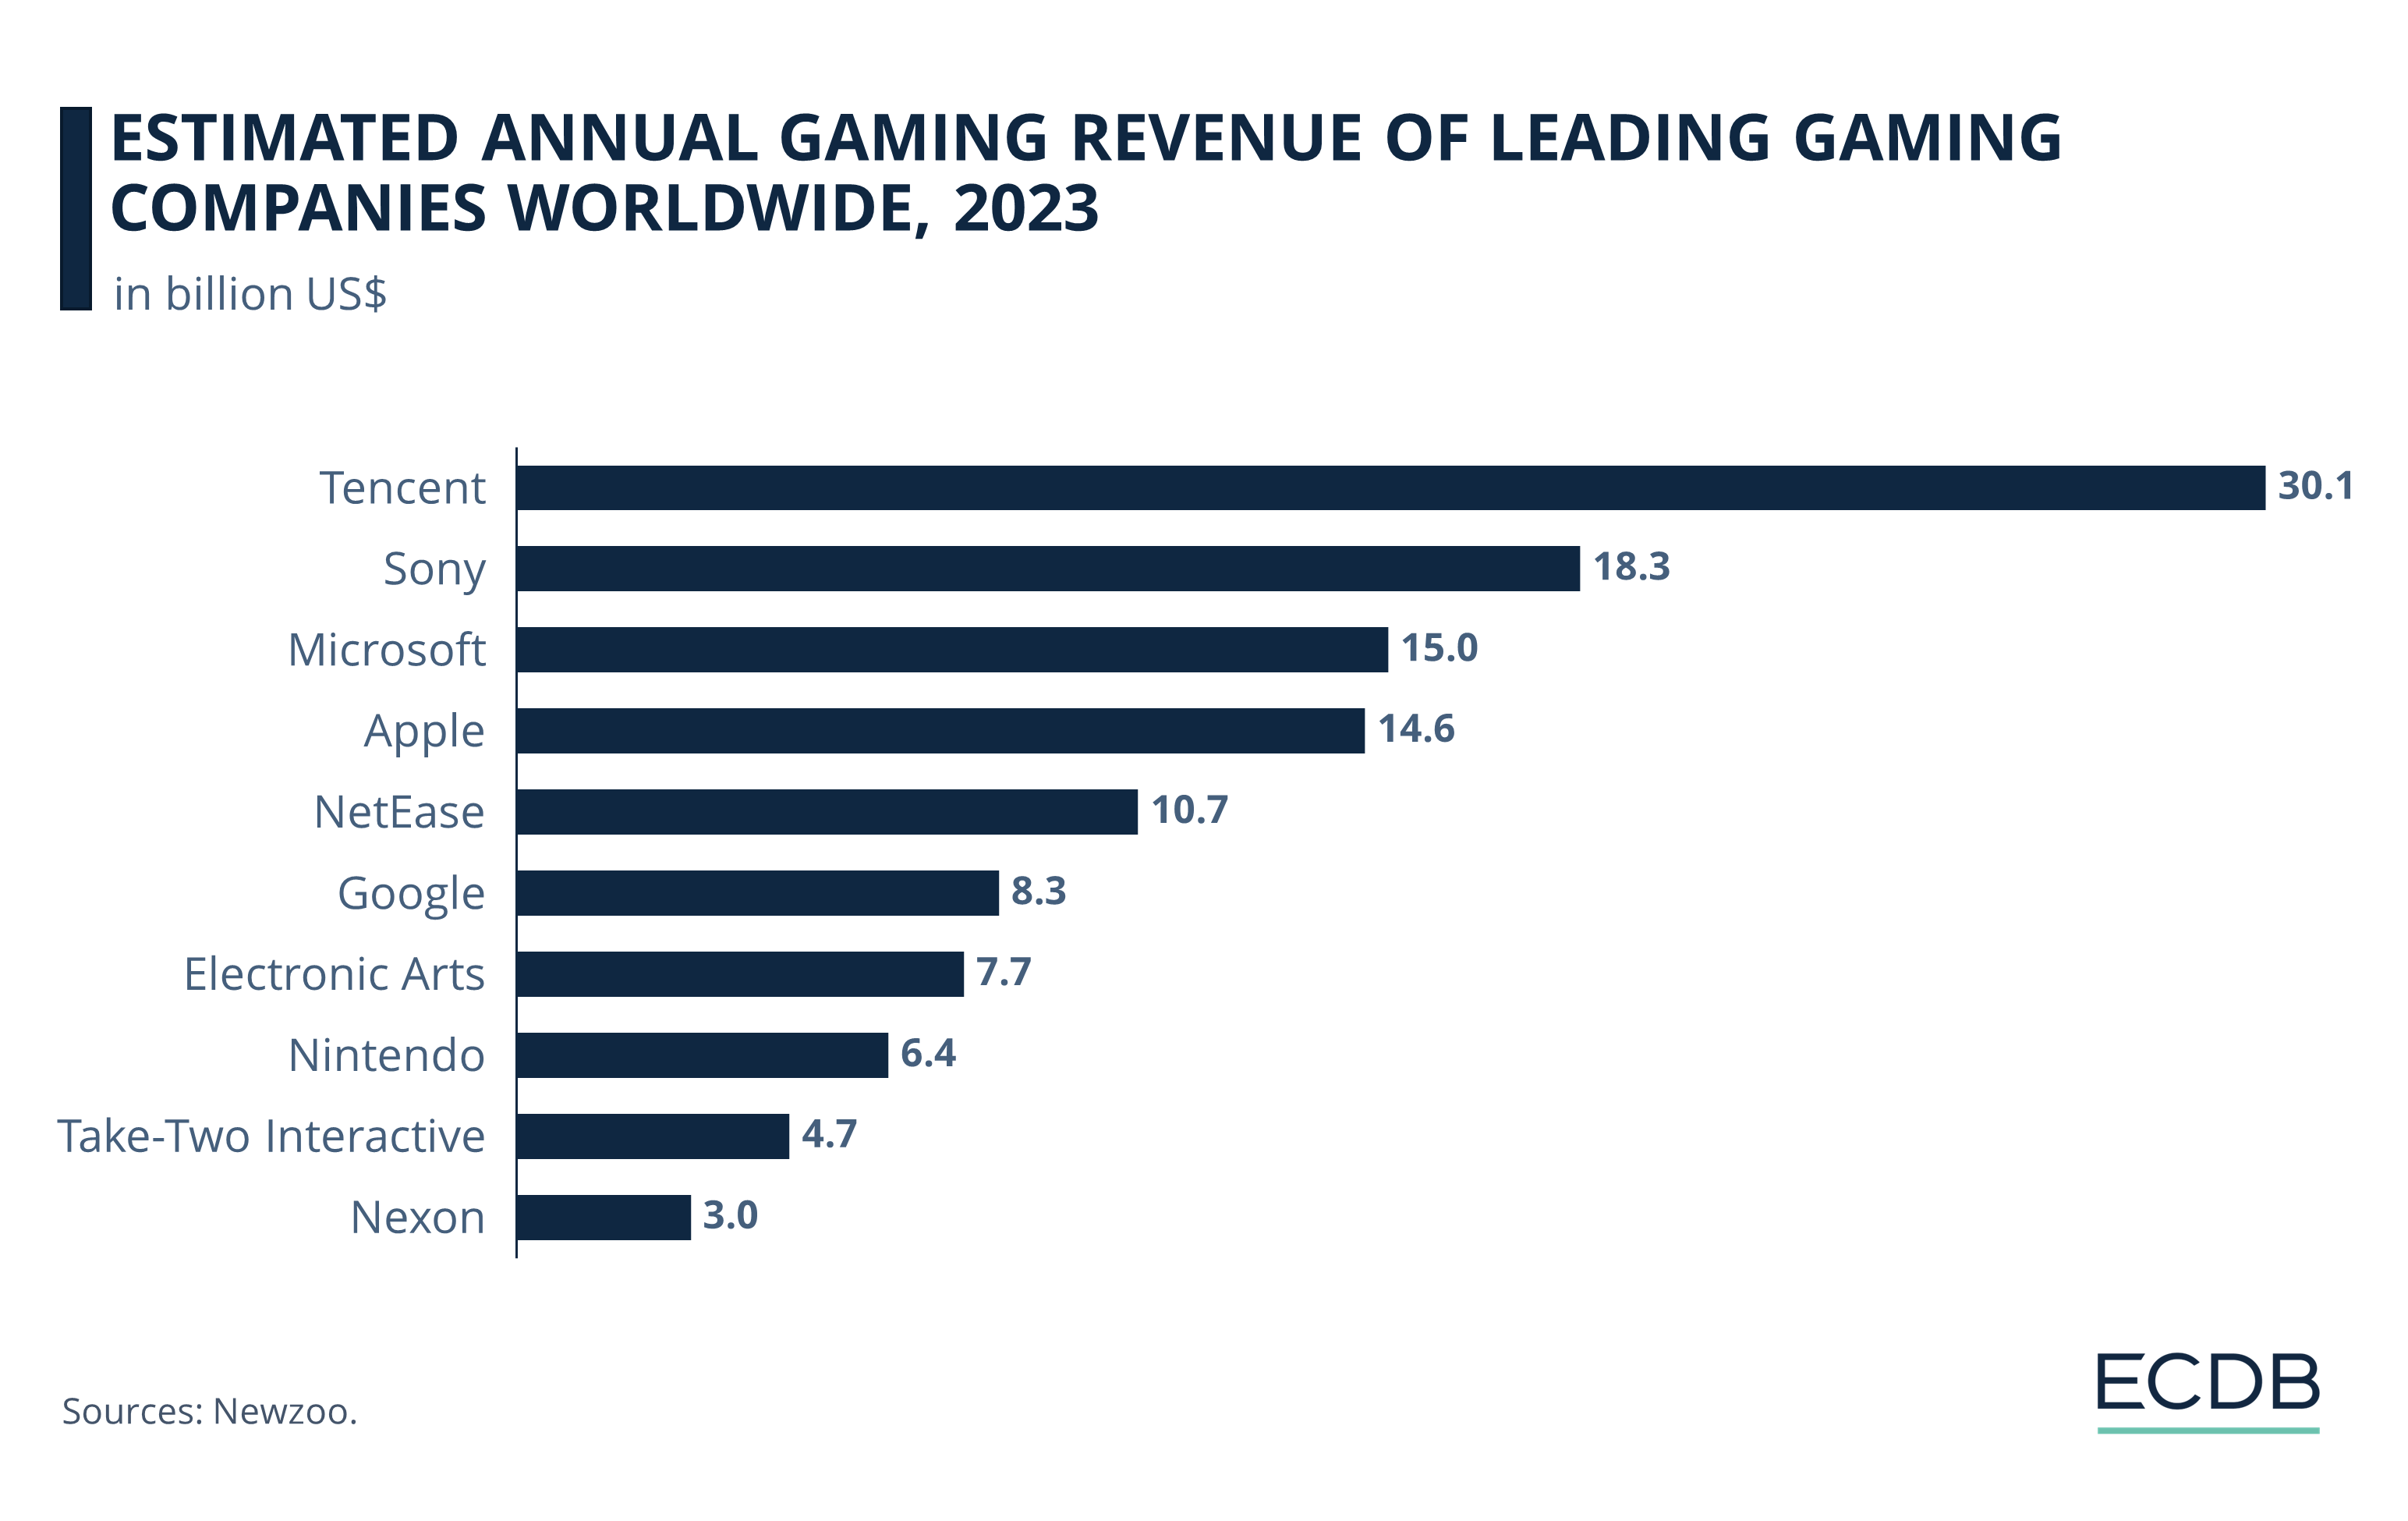 estimated-annual-gaming-revenue-of-leading-gaming-companies-worldwide-2022-12160.png